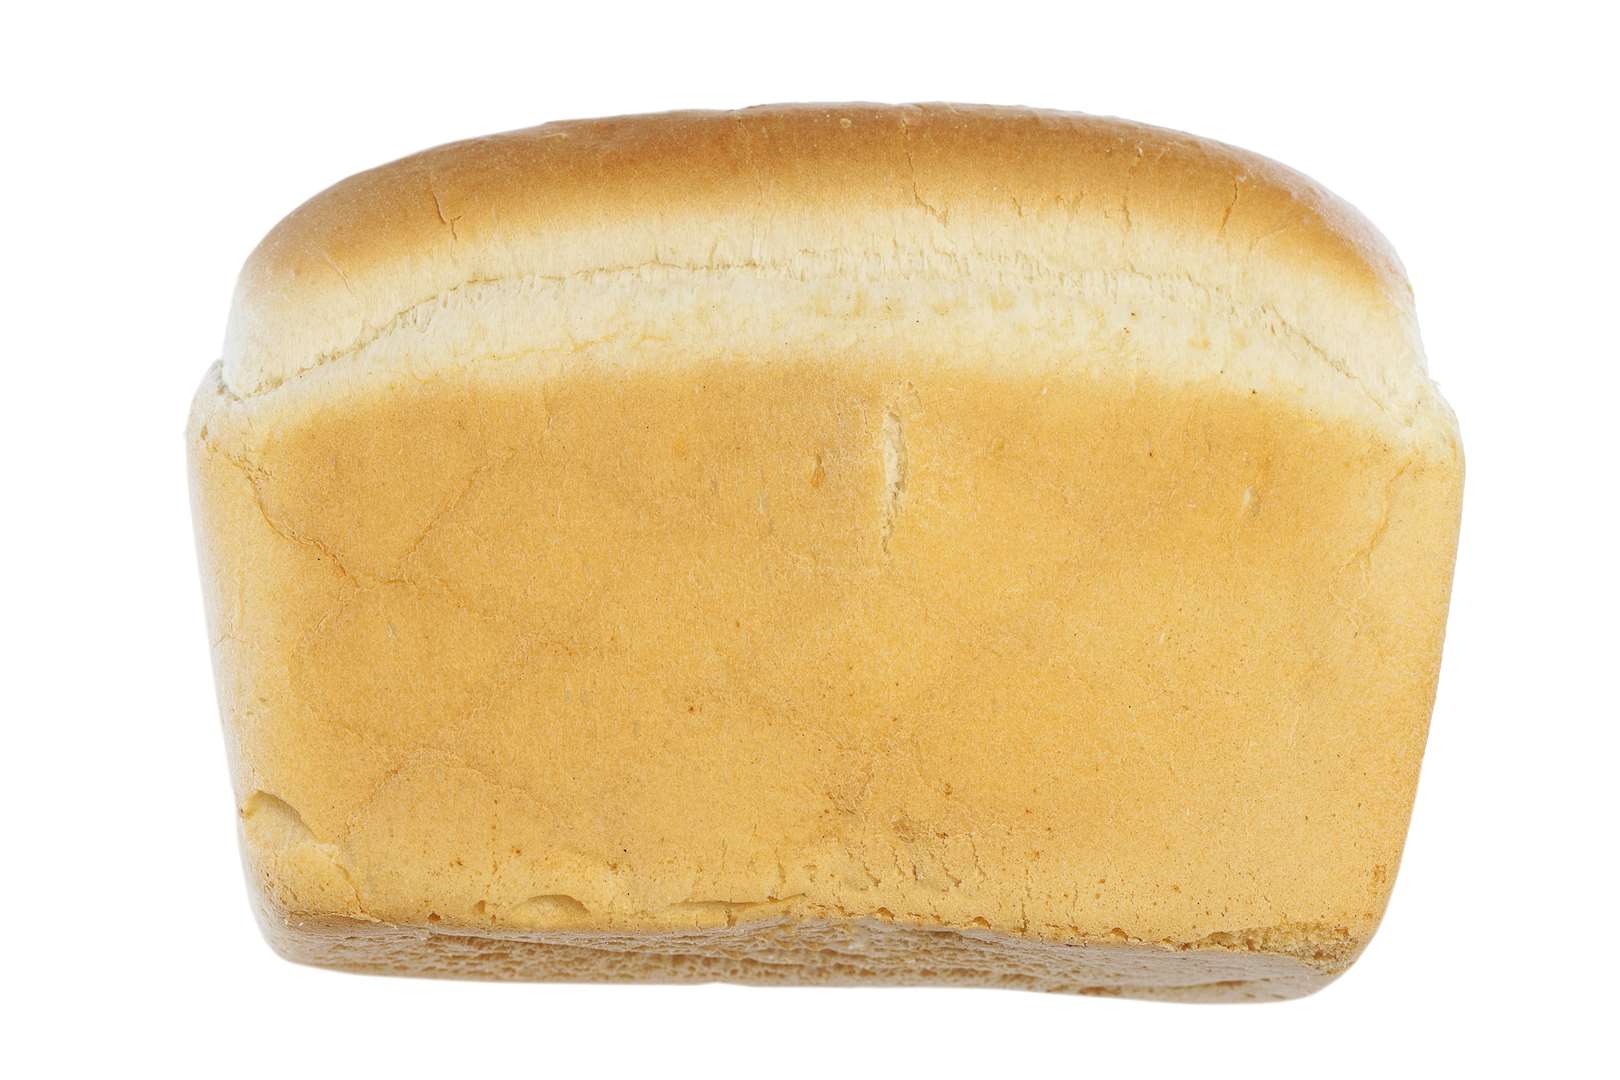 A loaf of bread. Stock image